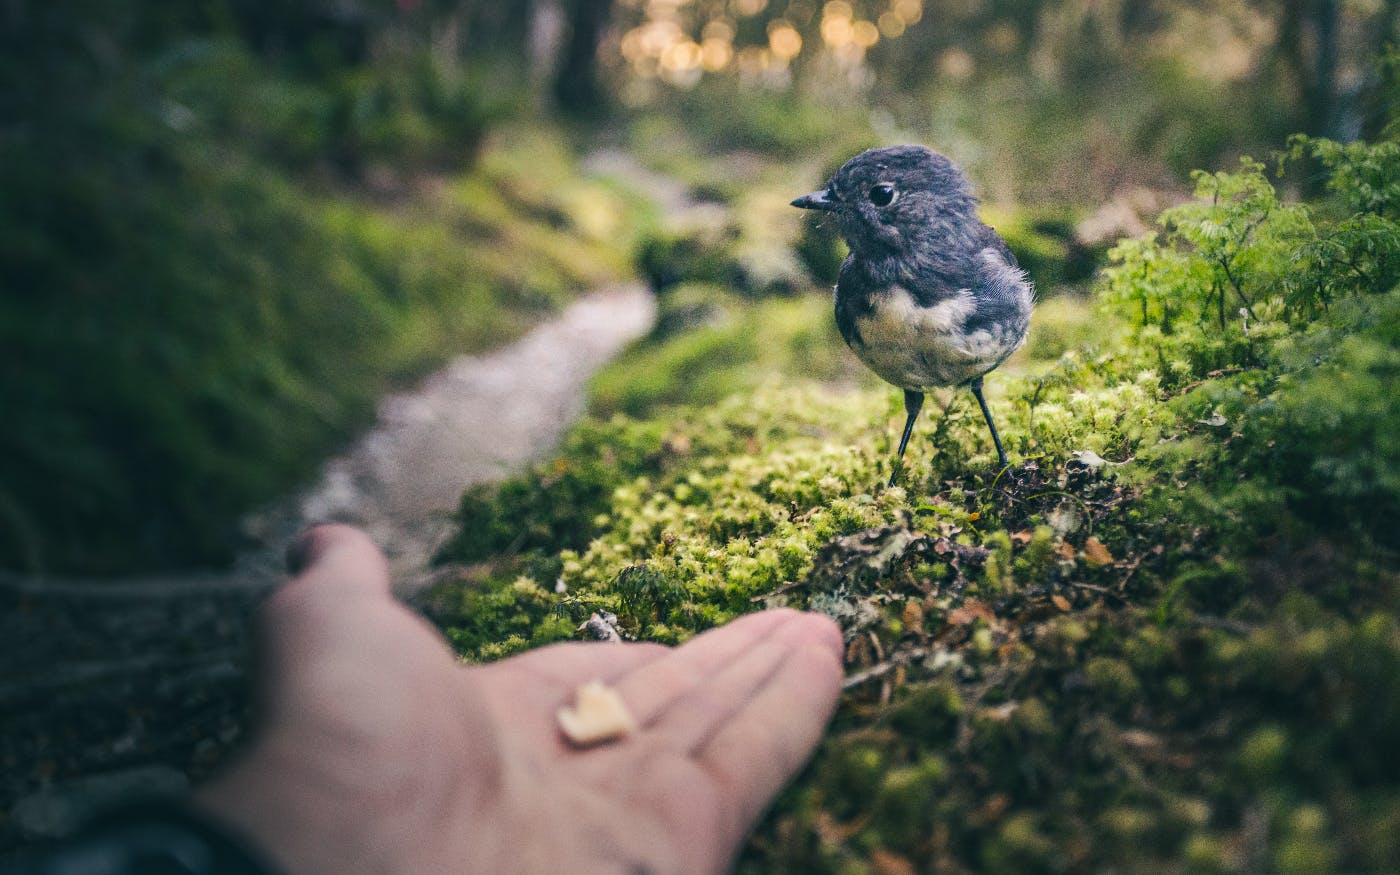 a hand with a small bit of bread reaching out to a little blue bird.